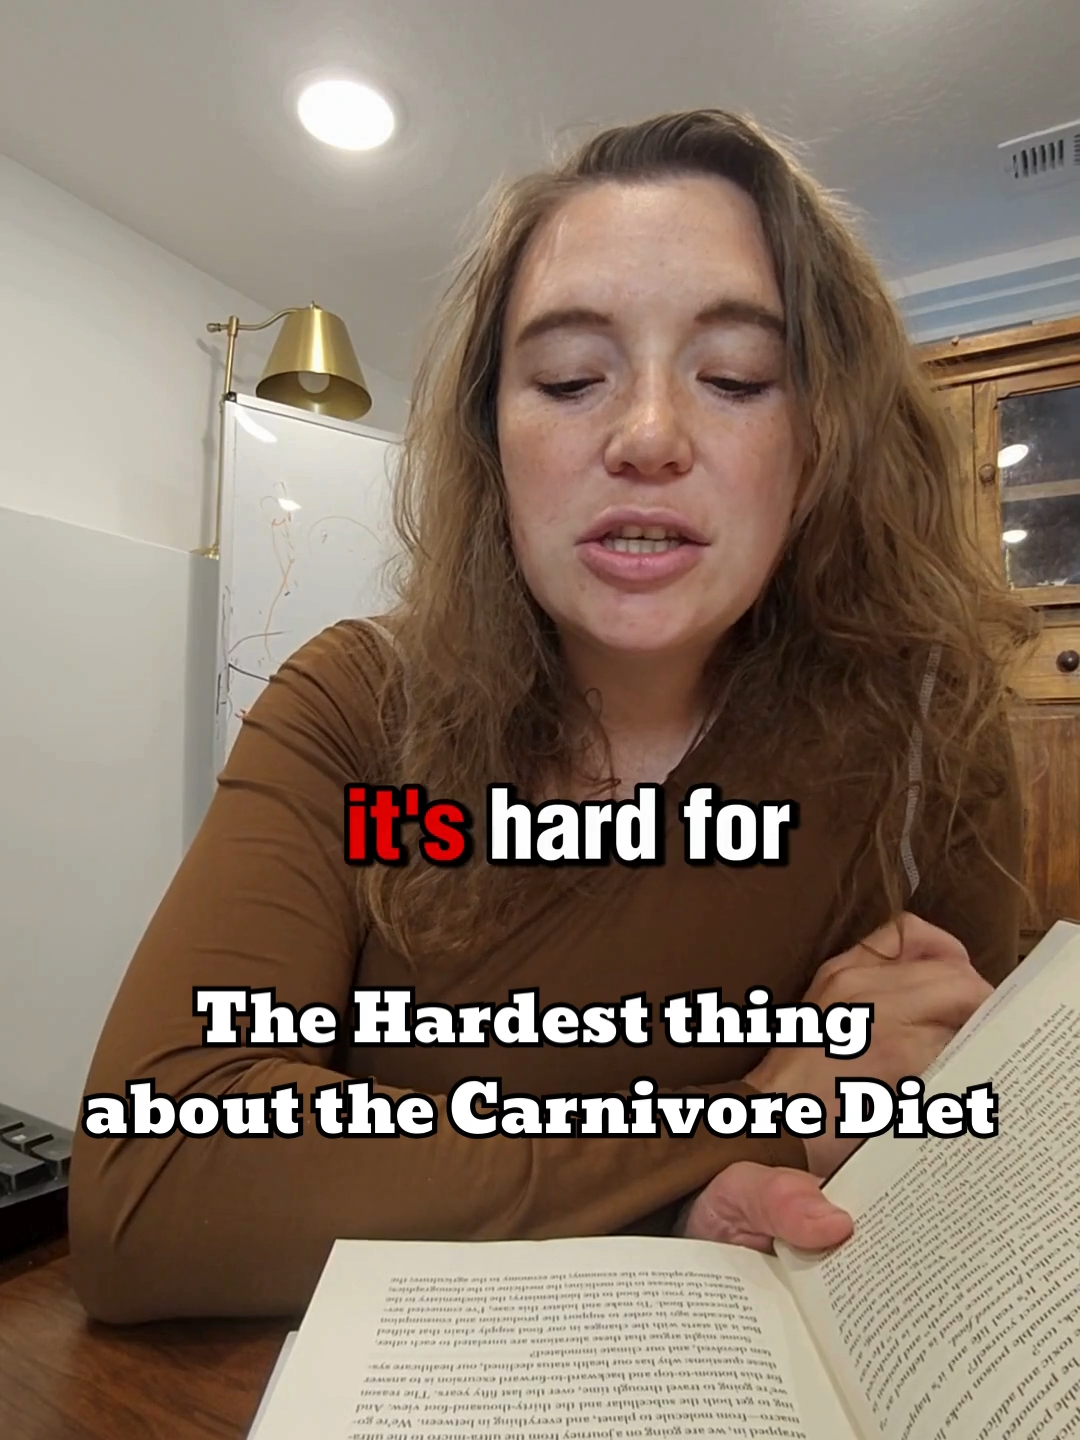 It's not about willpower, and it's not about being perfect.  Follow for more of my Carnivore journey videos. #Carnivore #carnivorediet #Carnivorelifestyle #carnivorelife #eatinghealthy #lds #motherhood #woman #coping #changing #believing  #tradwife #traditionallife #bossbabe #feminist #momanger #postpardum #newmom